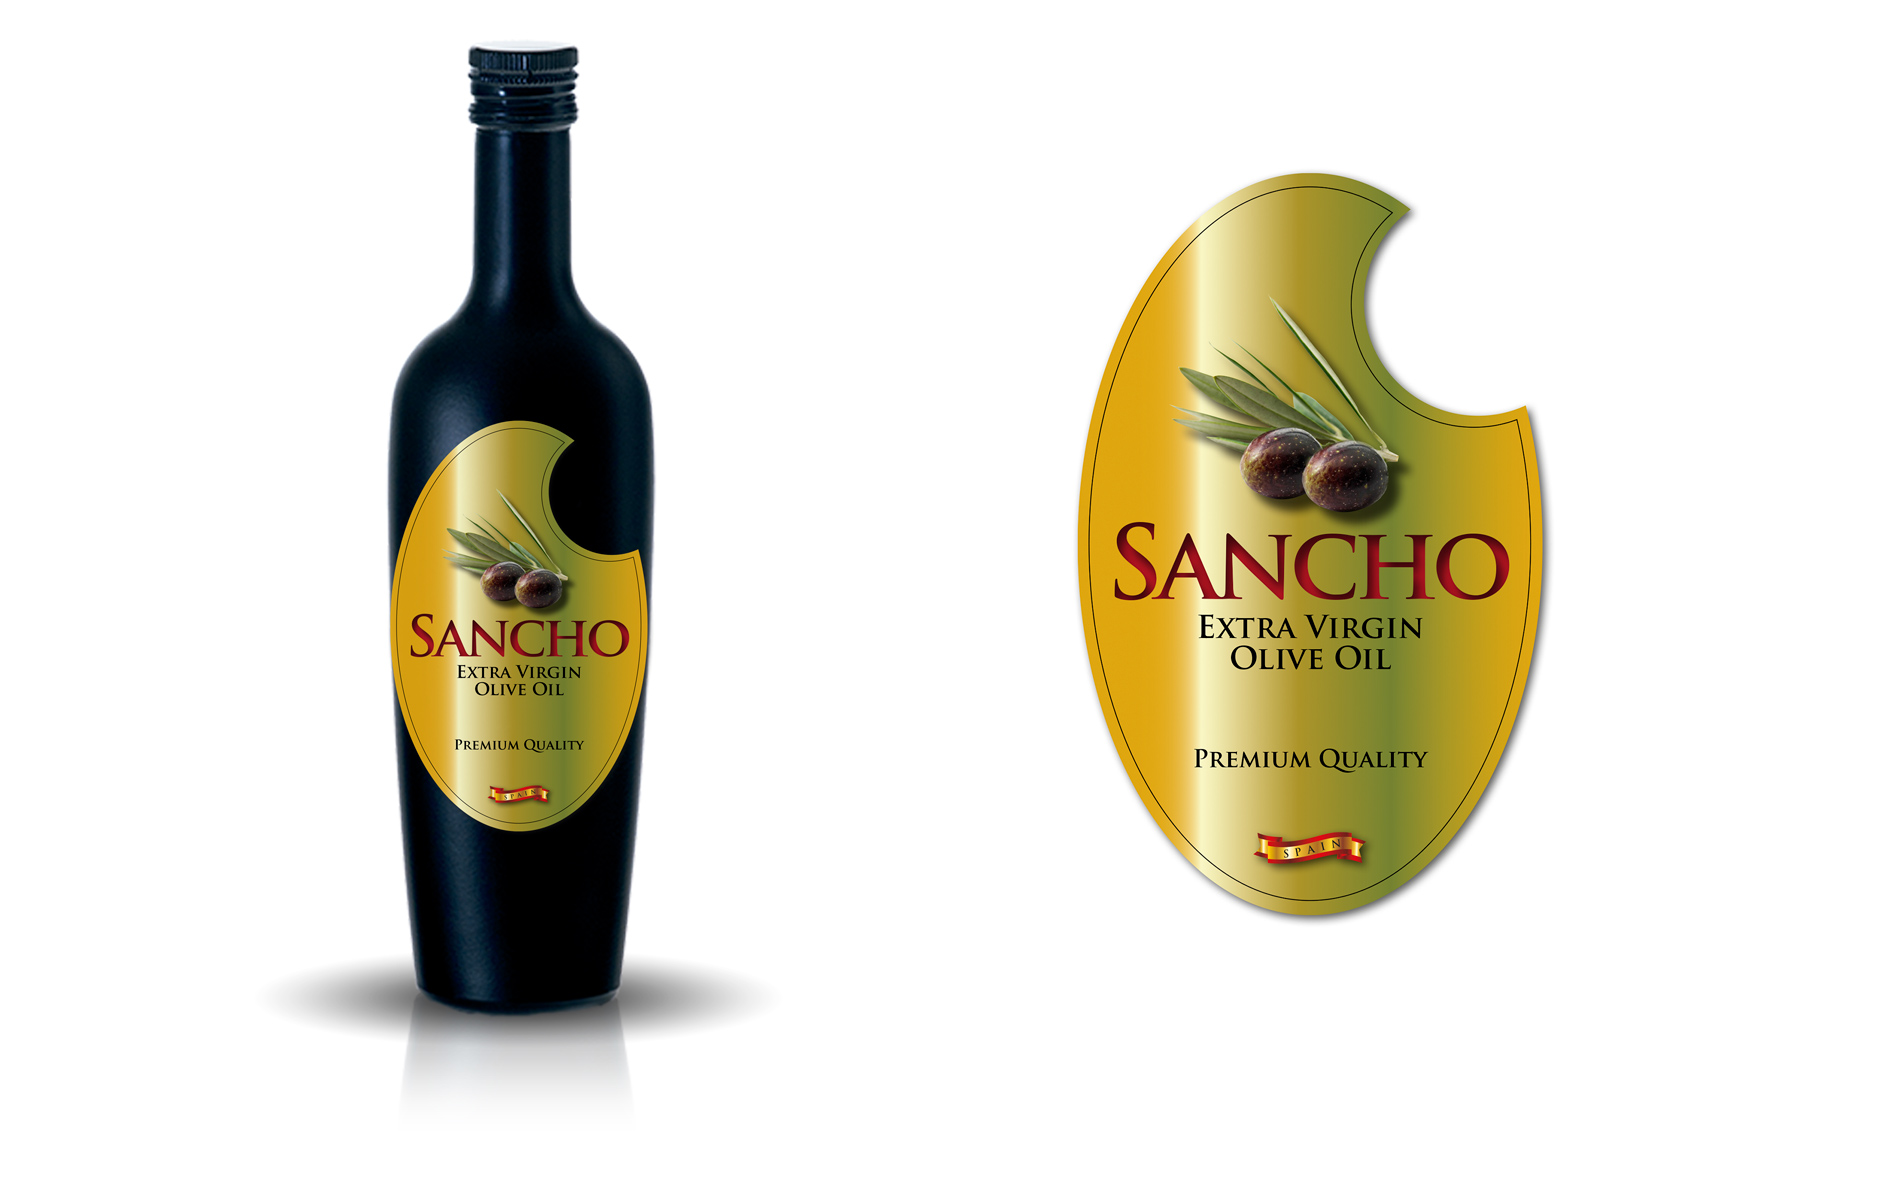 Portfolio of graphic and creative design works of extra virgin olive oil label design and packaging for SANCHO OLIVE OIL